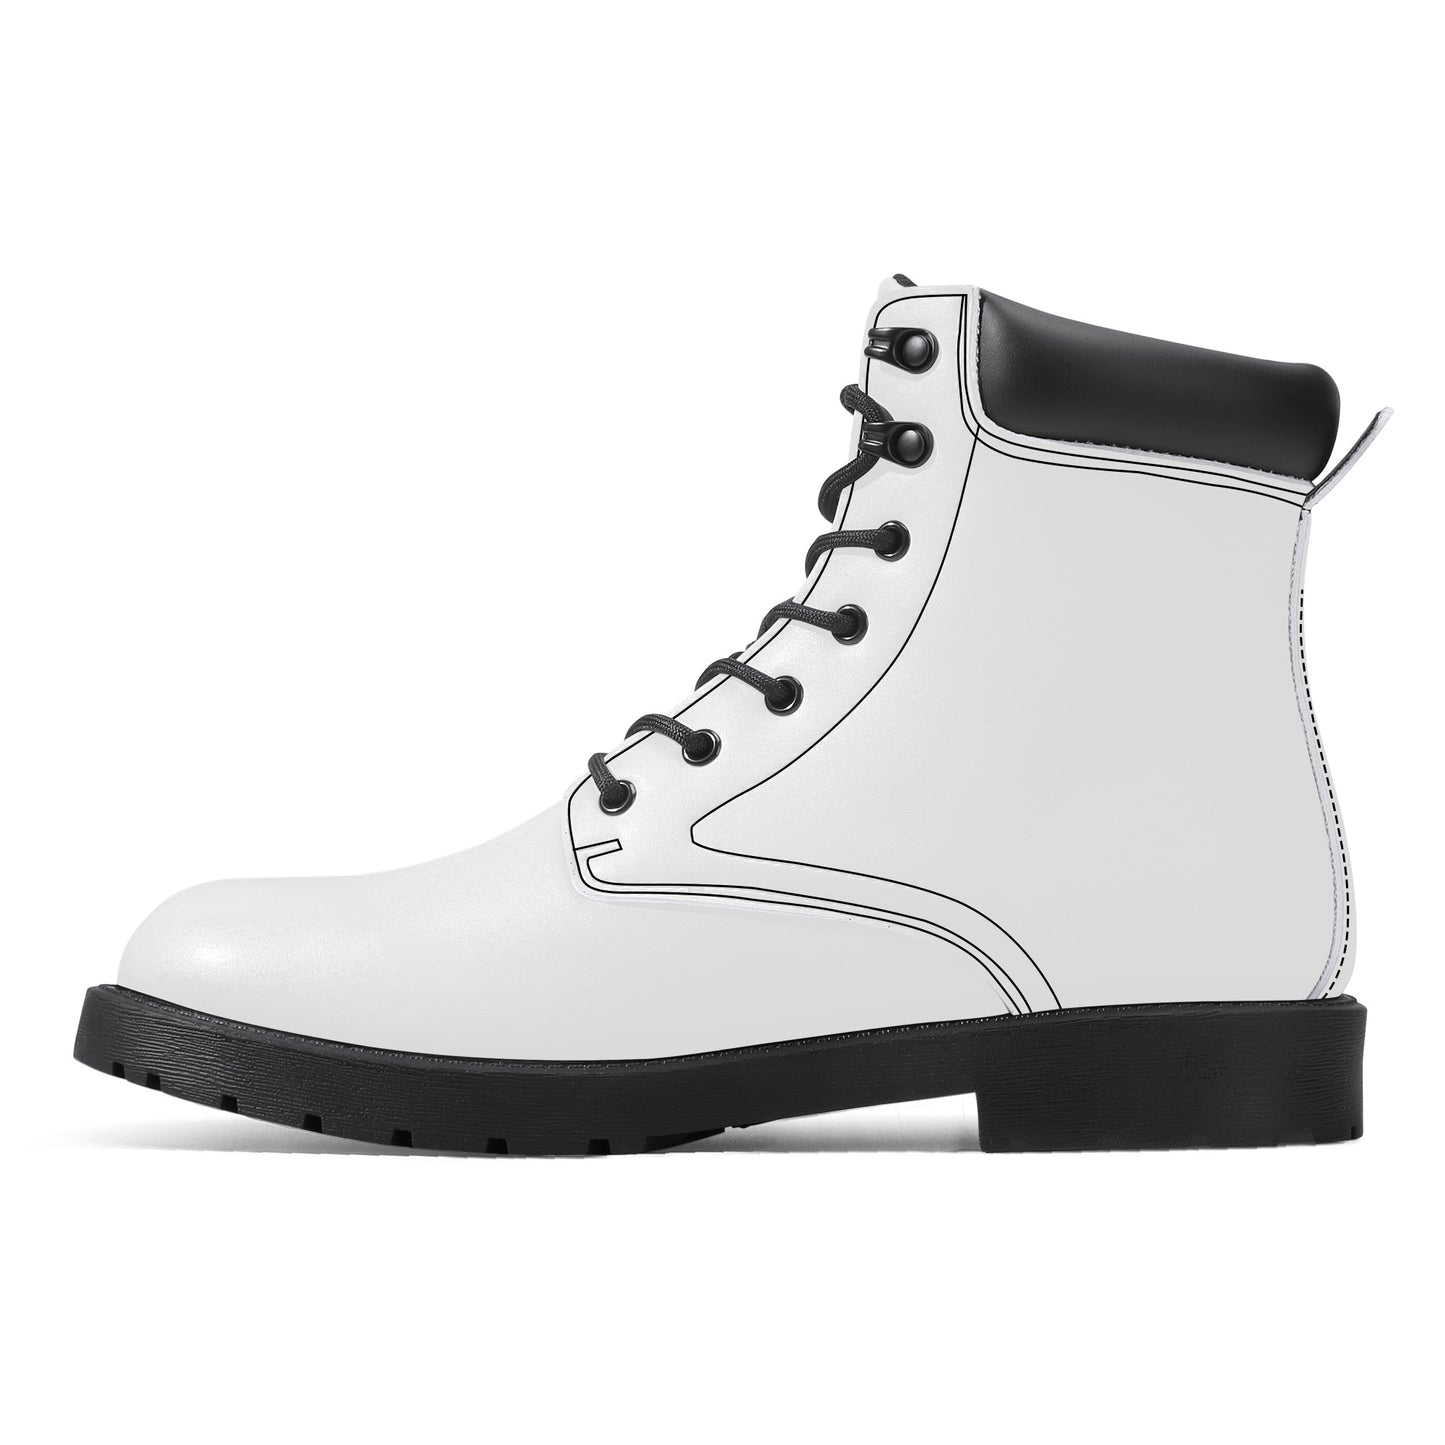 Cryptic Synthetic Leather Boots, White